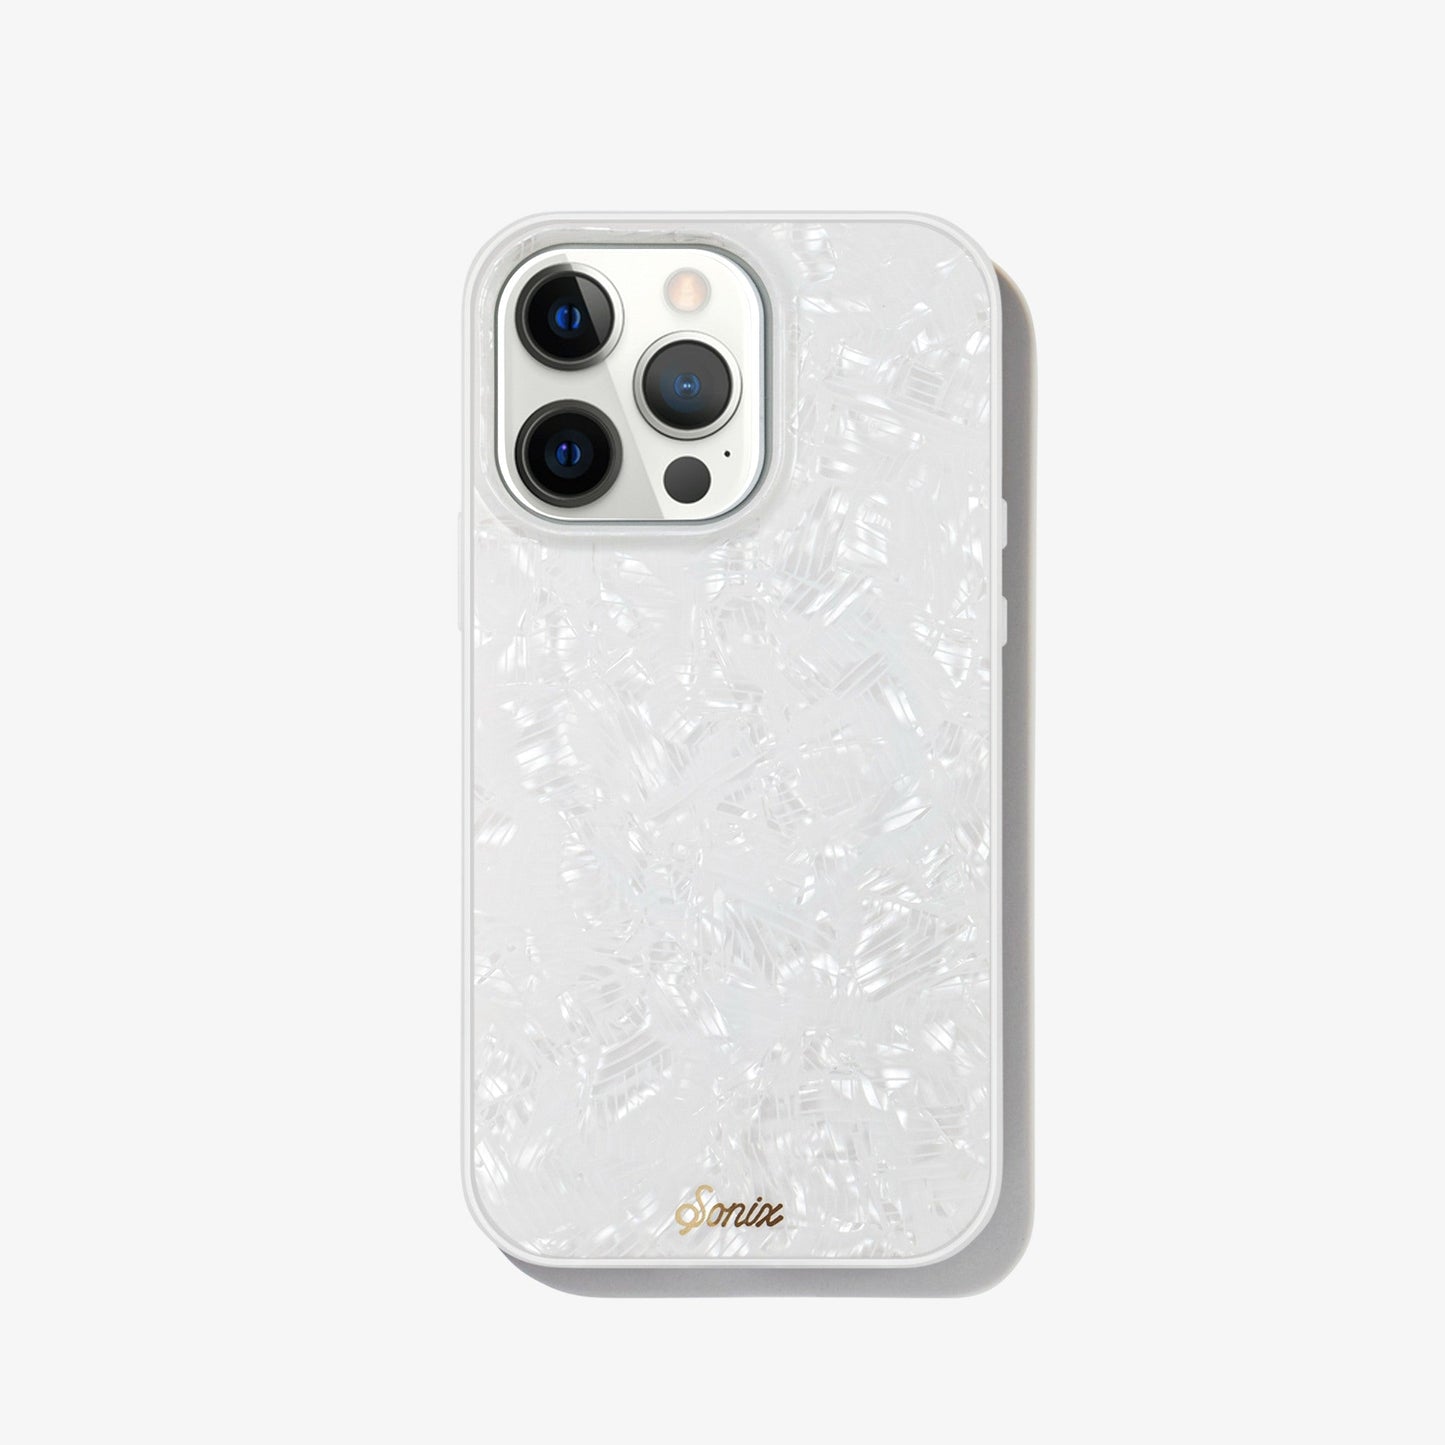 lustrous, gleaming pearl case shown on an iphone 12